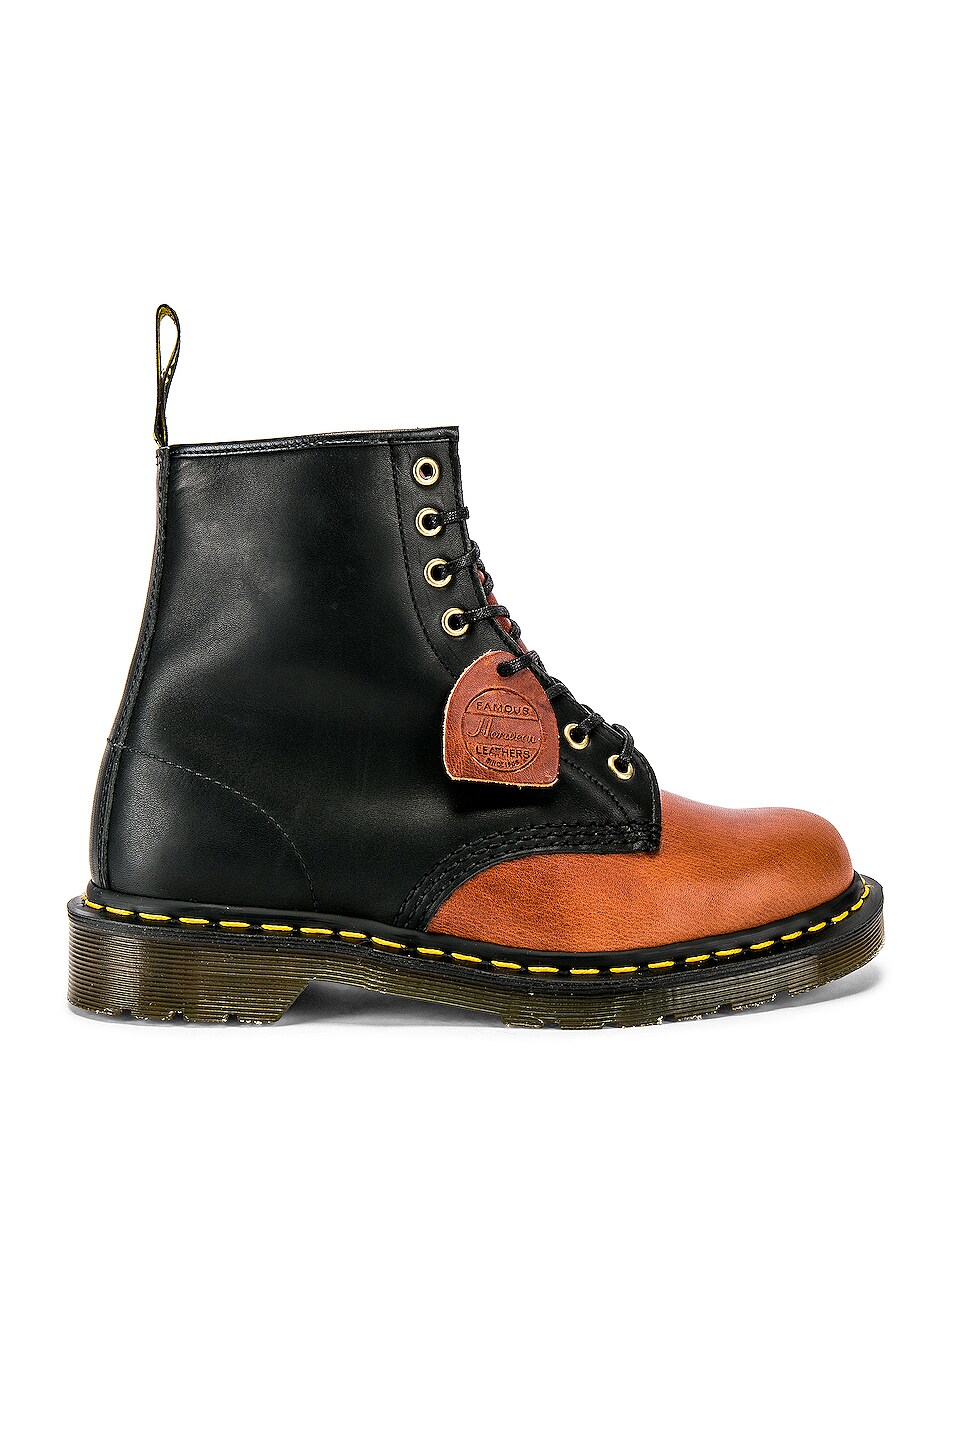 Image 1 of Dr. Martens Made in England 1460 Dublin Boots in Black & Mocha